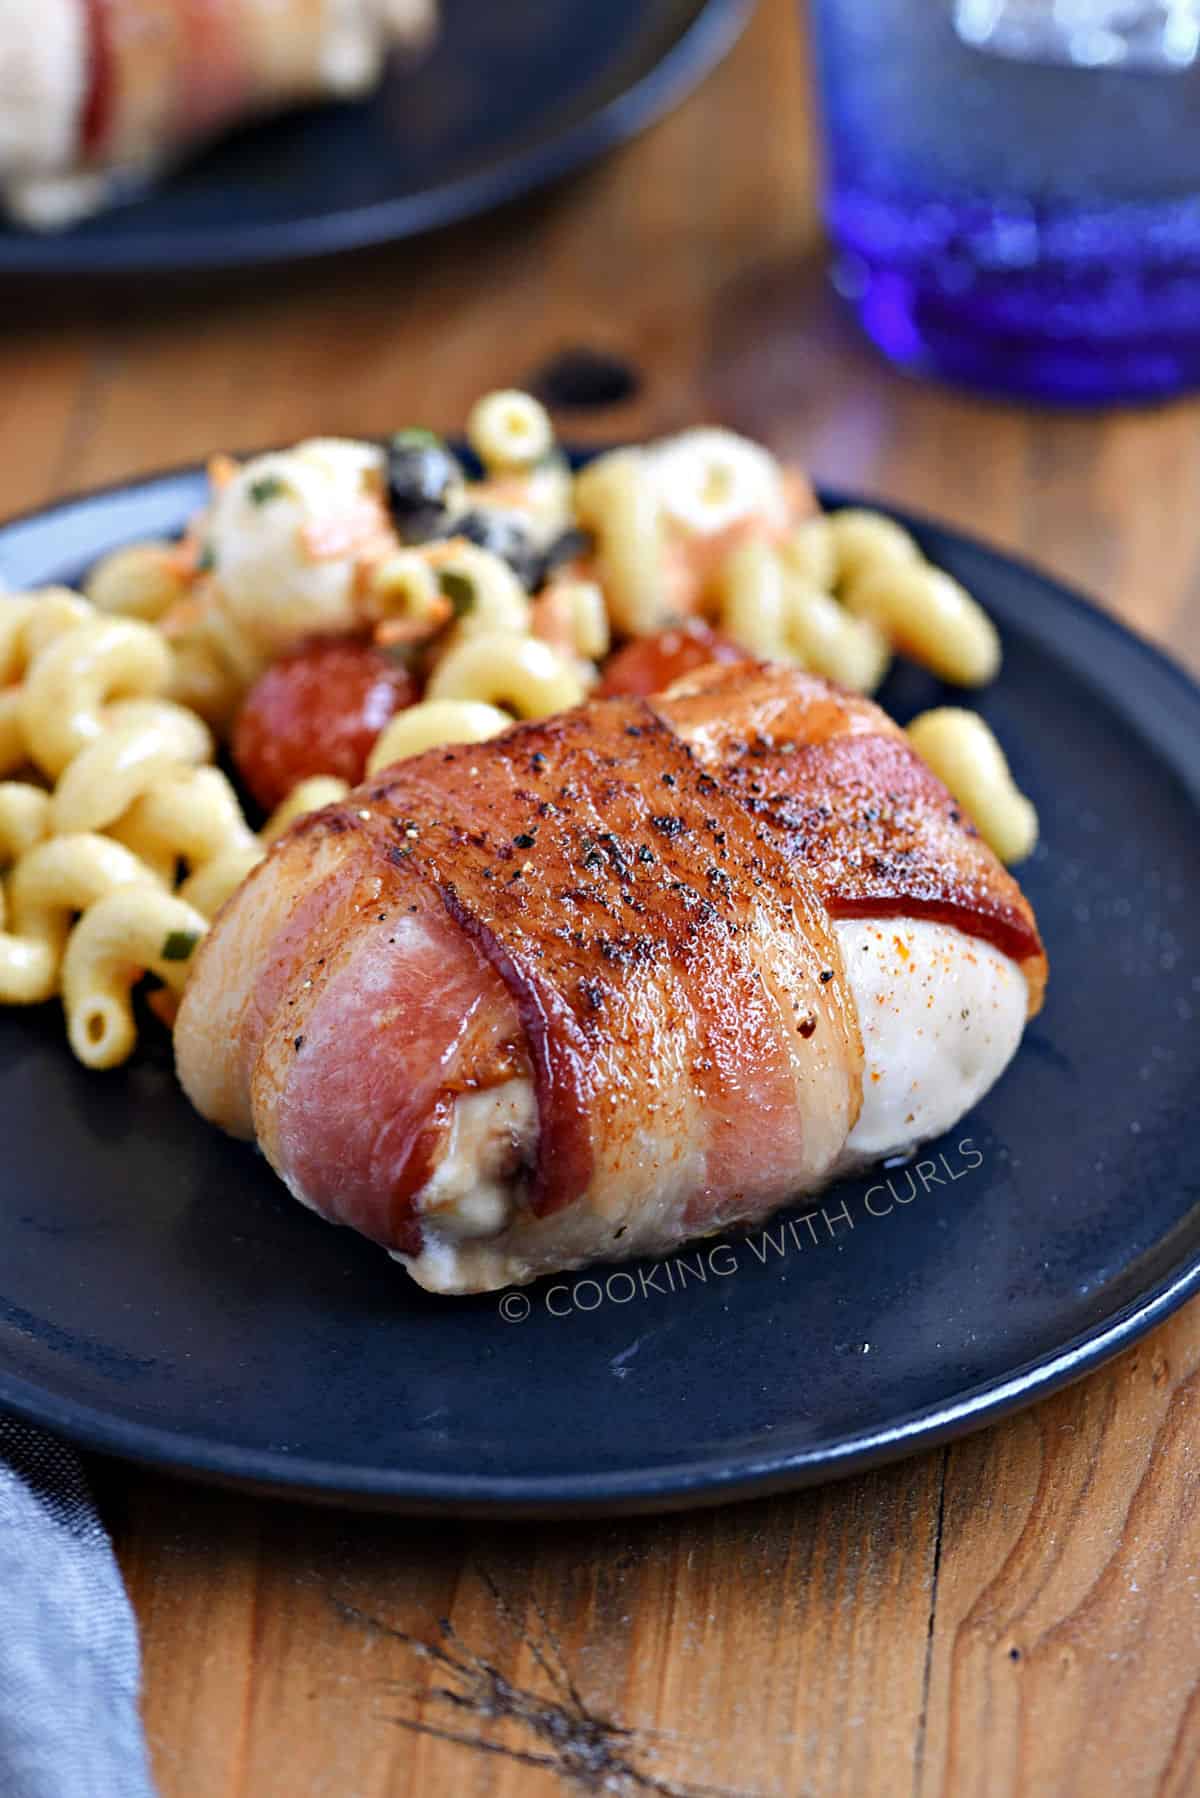 Bacon wrapped chicken and pasta salad on a blue plate.